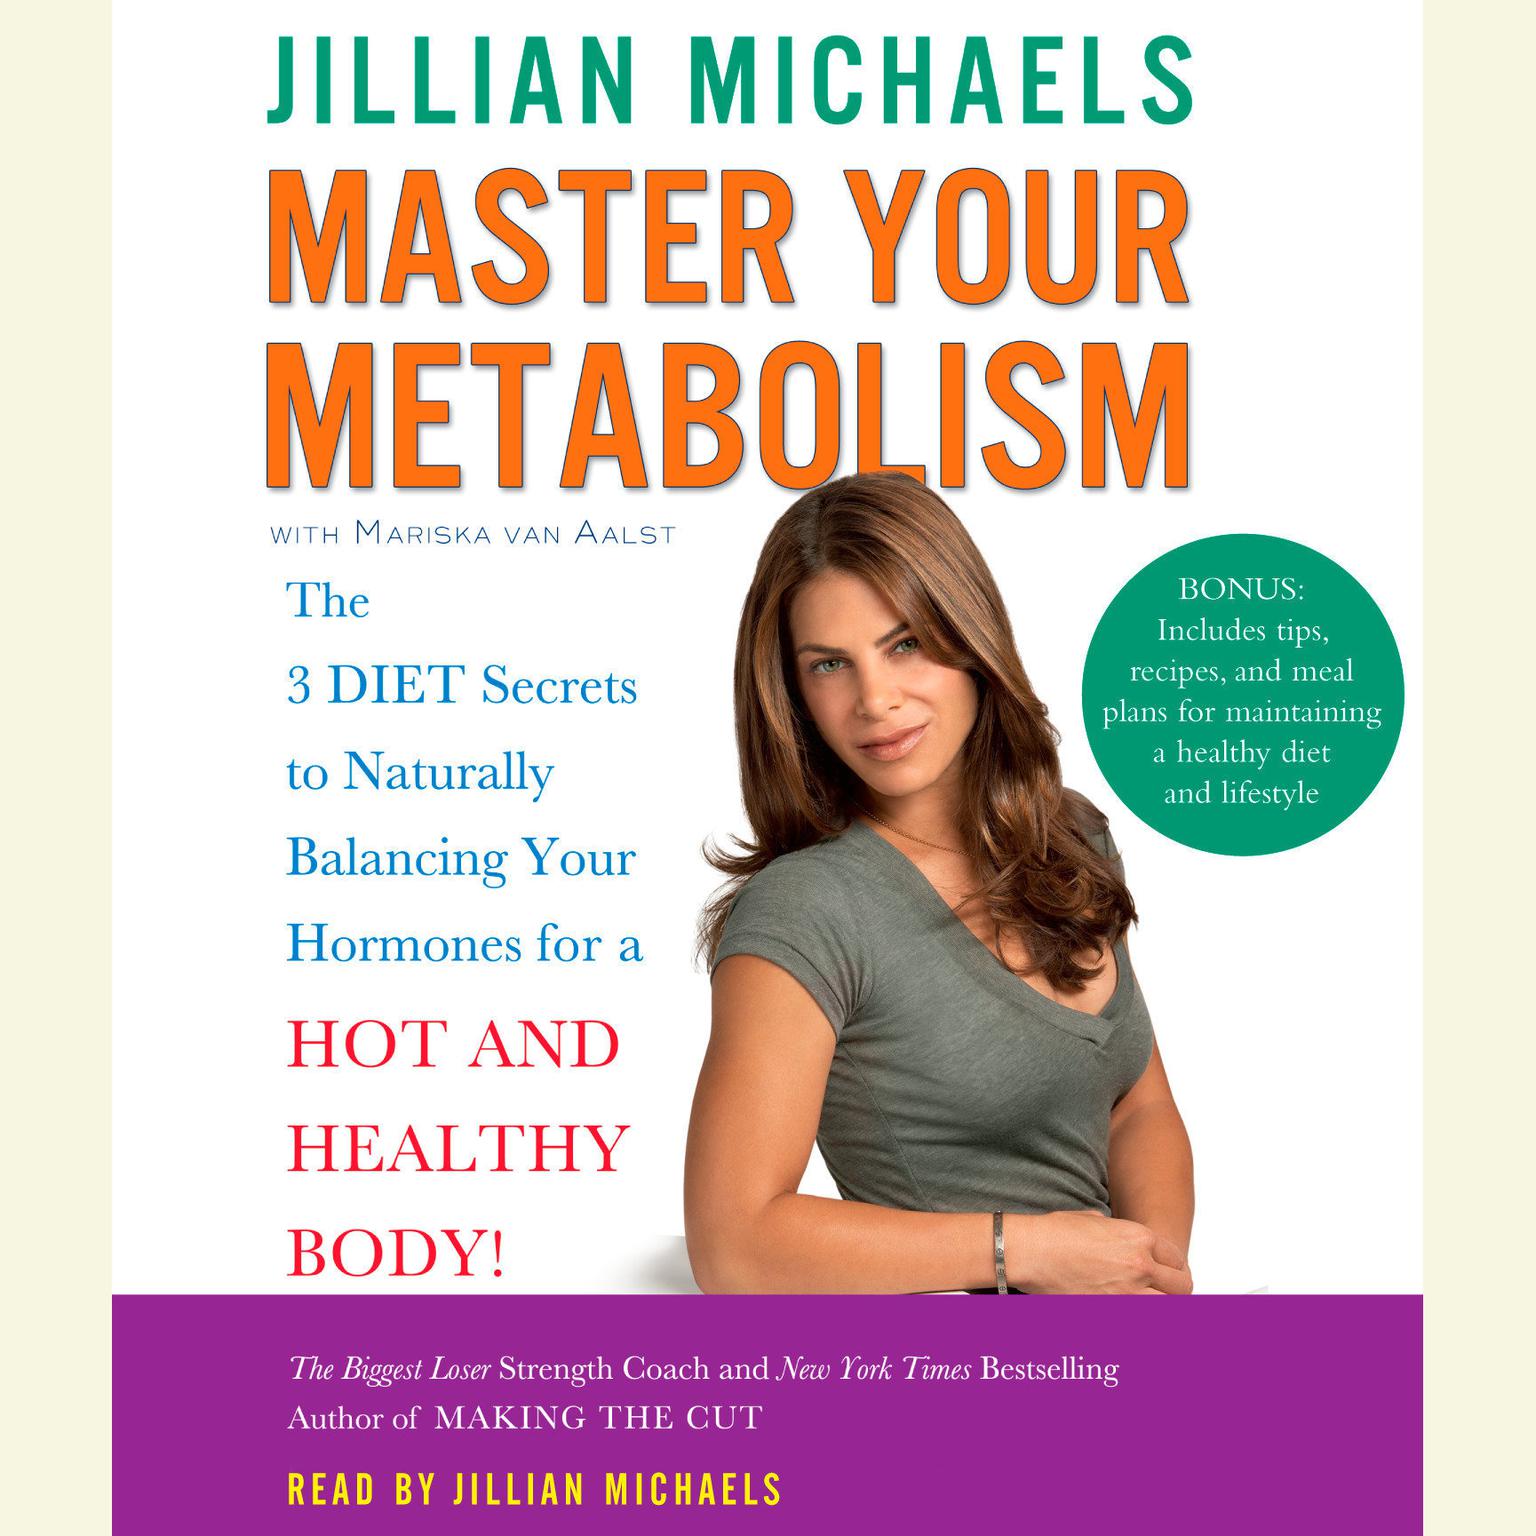 Master Your Metabolism (Abridged): The 3 Diet Secrets to Naturally Balancing Your Hormones for a Hot and Healthy Body! Audiobook, by Jillian Michaels